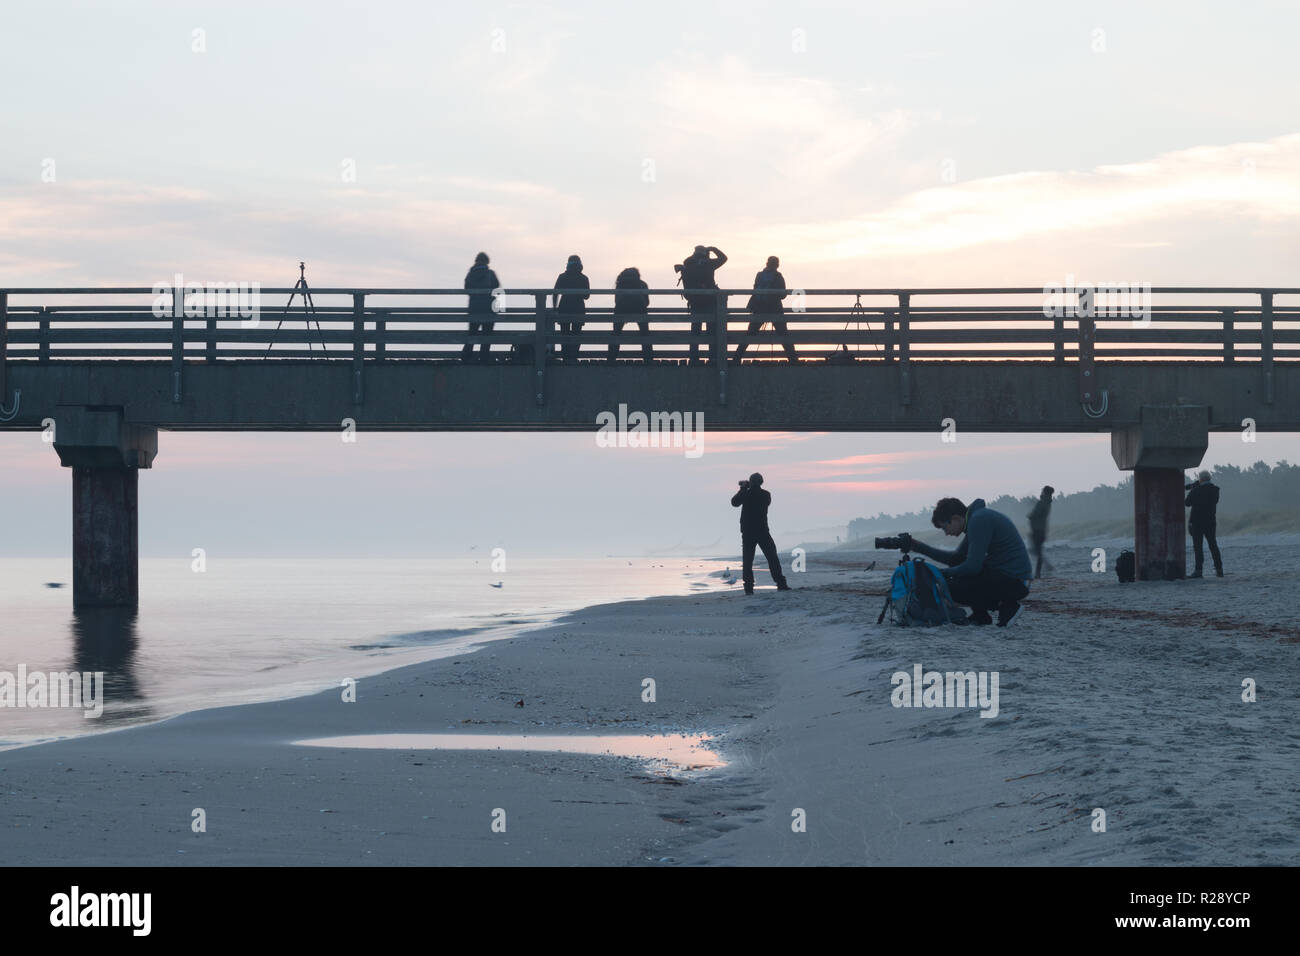 Prerow, Germany - October 10, 2018: View of photographers photographing the sunrise on the beach of Prerow at the Baltic Sea, Germany. Stock Photo